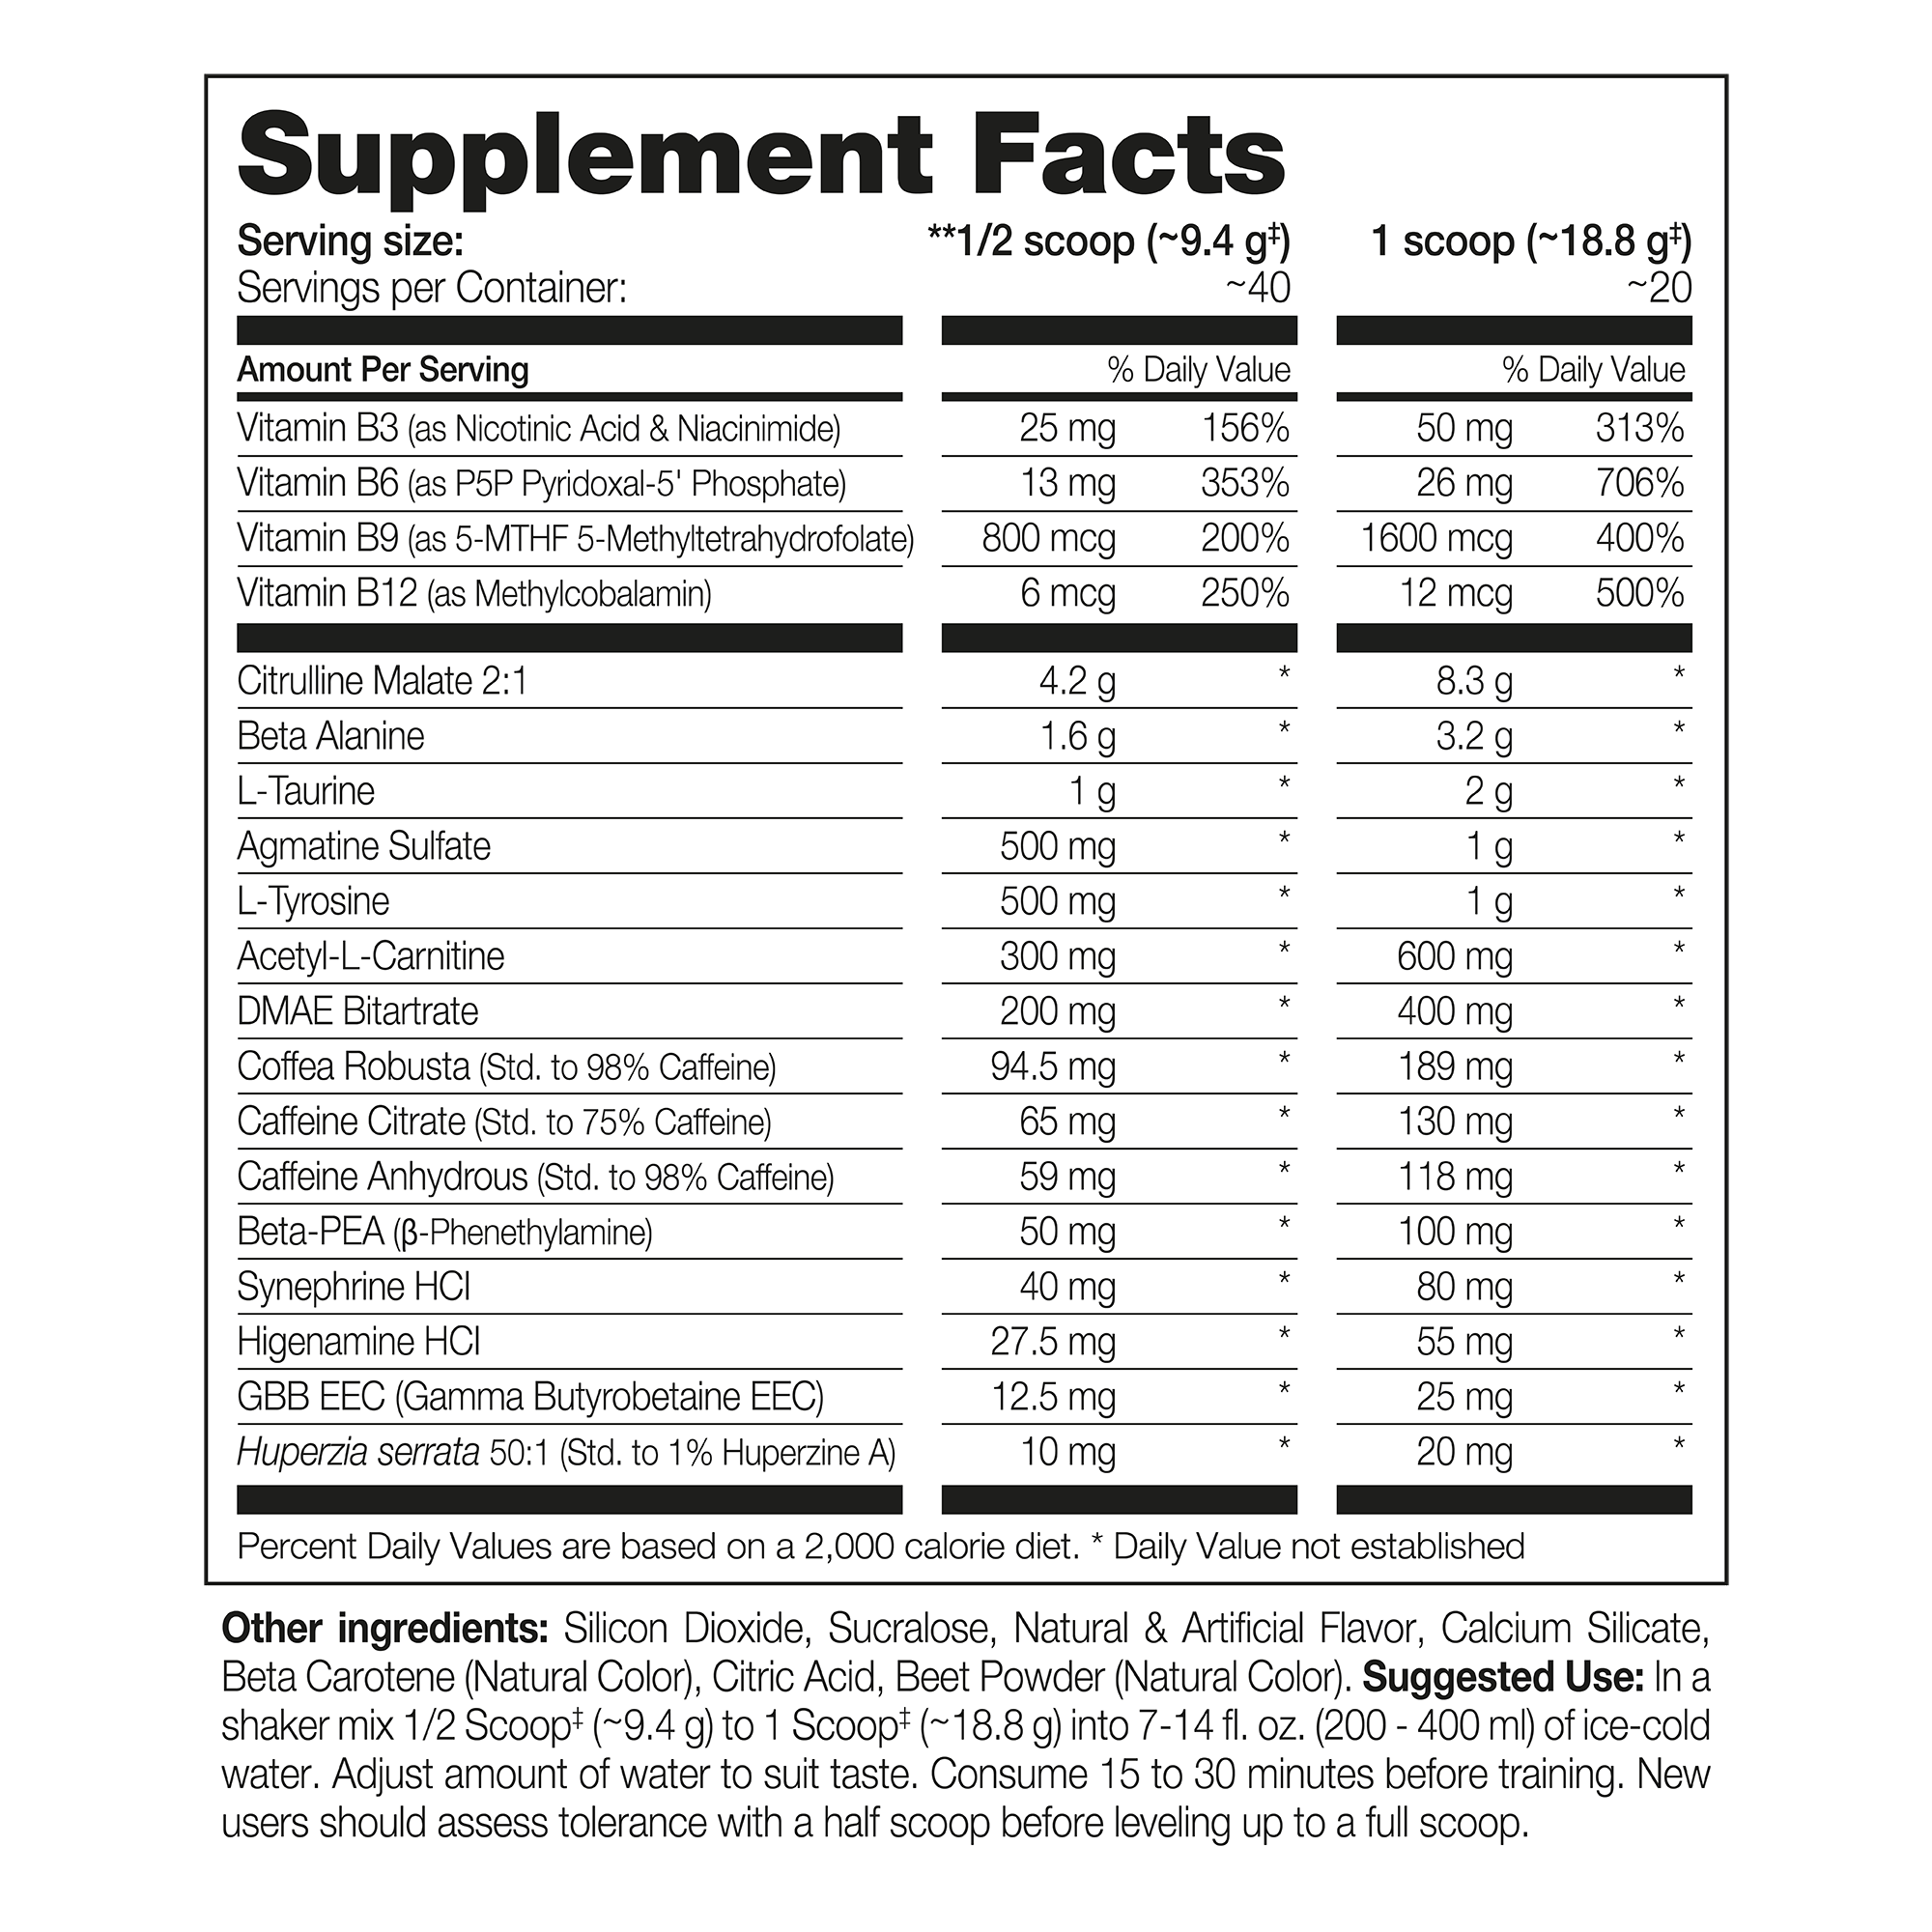 Perfect Sports ALTRD State 40 Servings